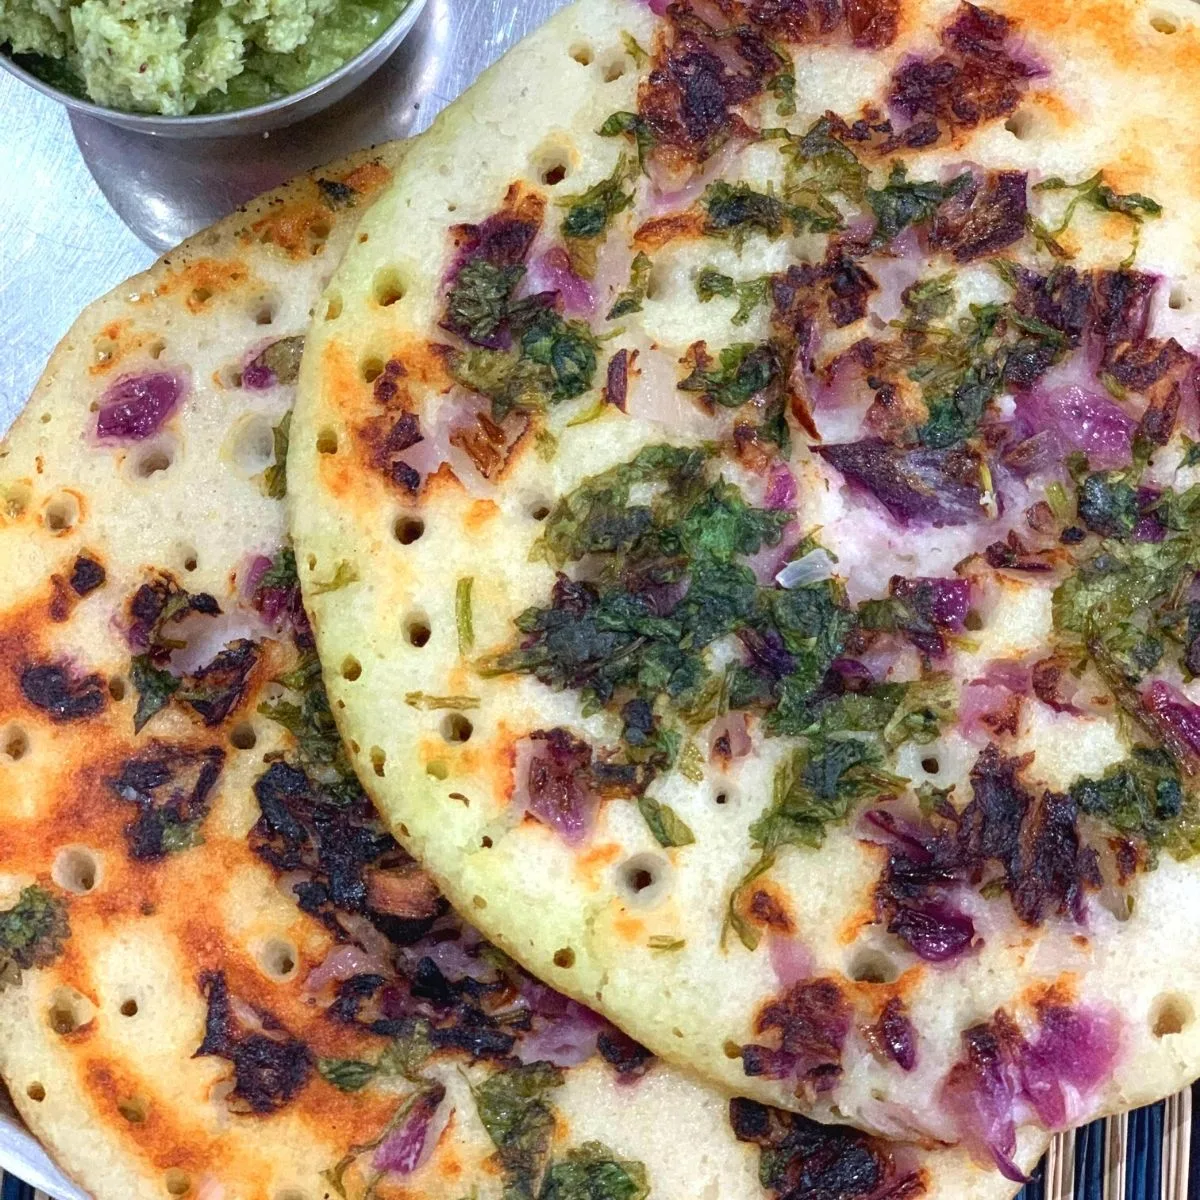 Onion Uttapam is an easy South Indian Breakfast Recipe or savoury pancakes that is made using fermented batter using Rice and Lentils.